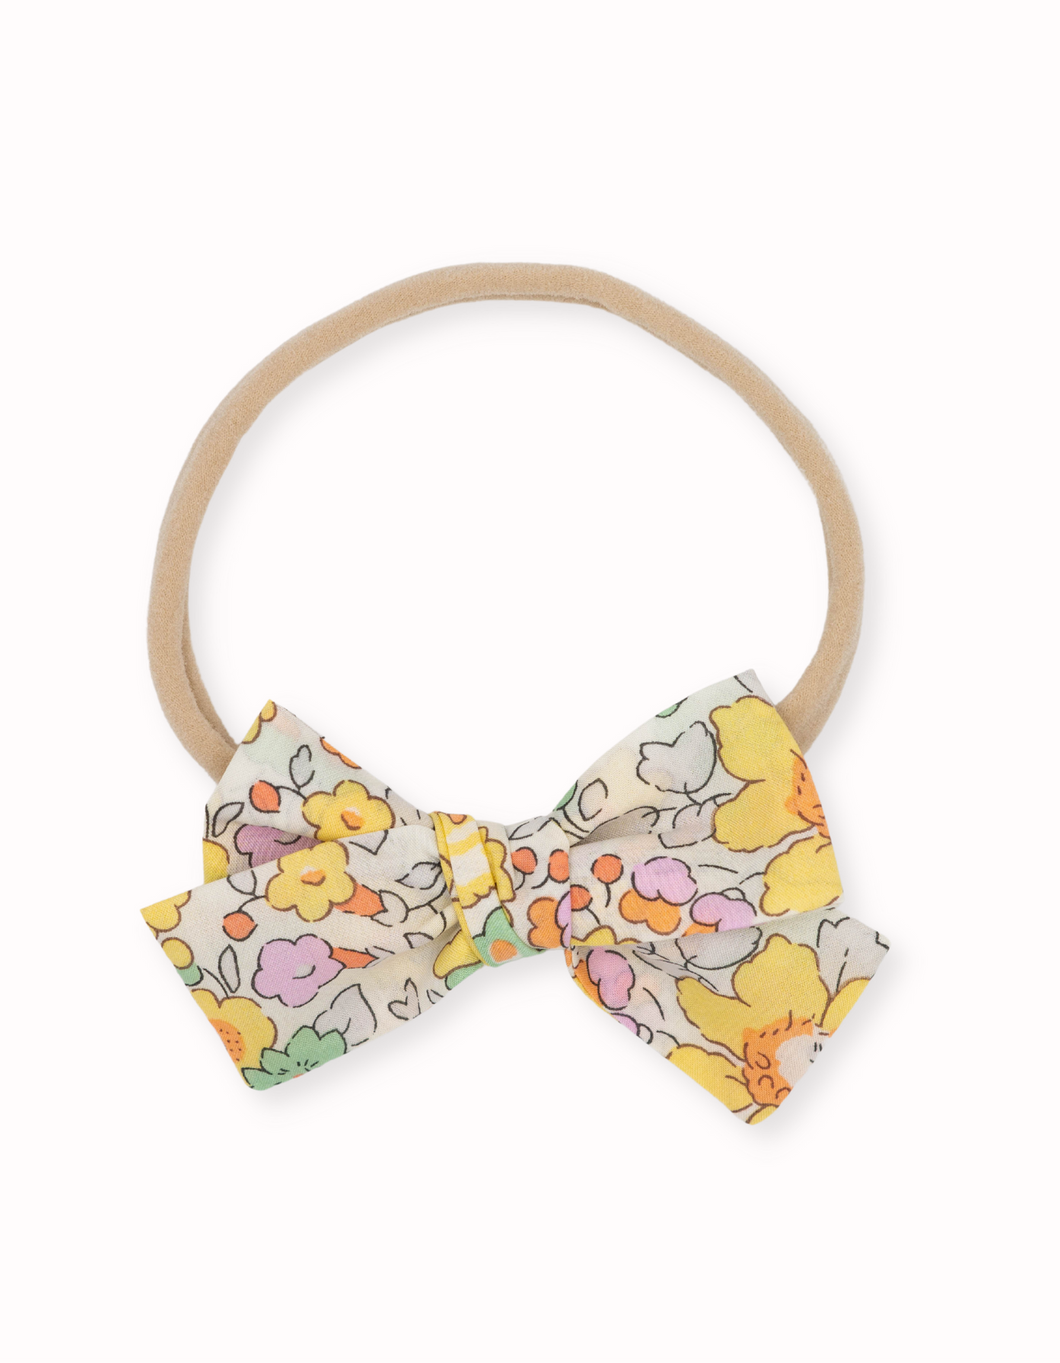 Lucy Baby Bow Headband in Liberty of London Fabric